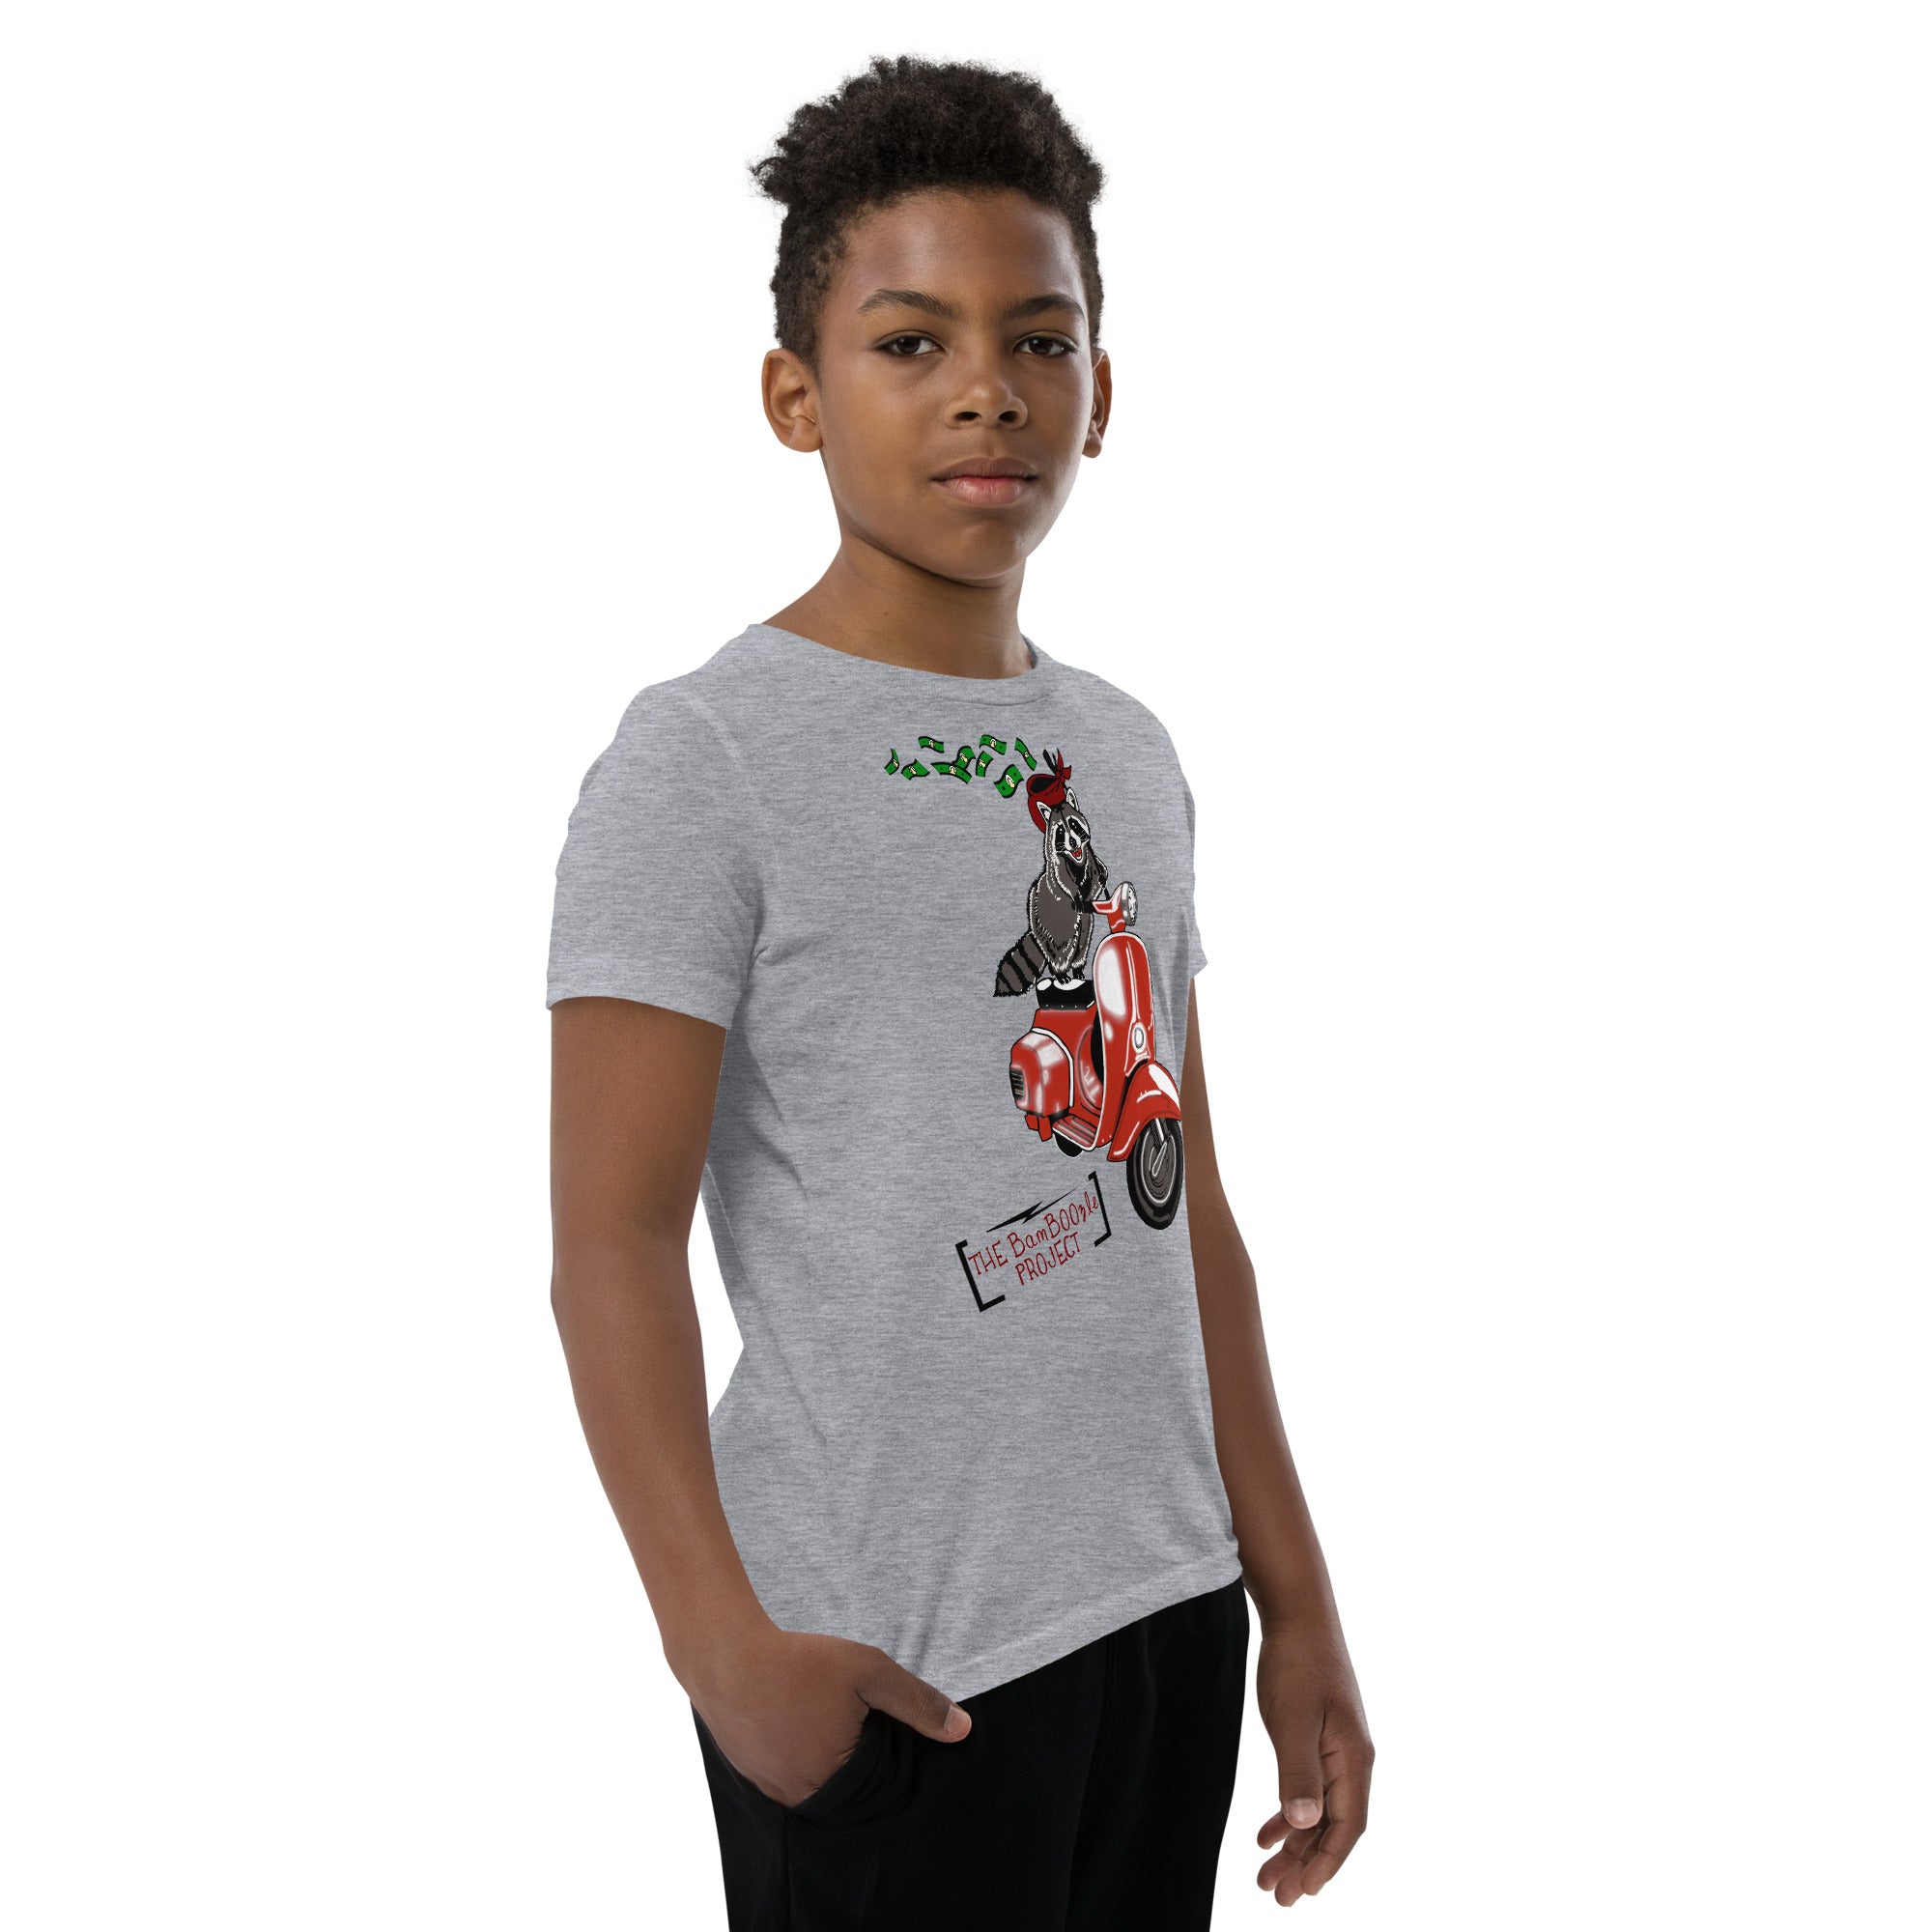 Scoot the Loot Youth Short Sleeve T-Shirt